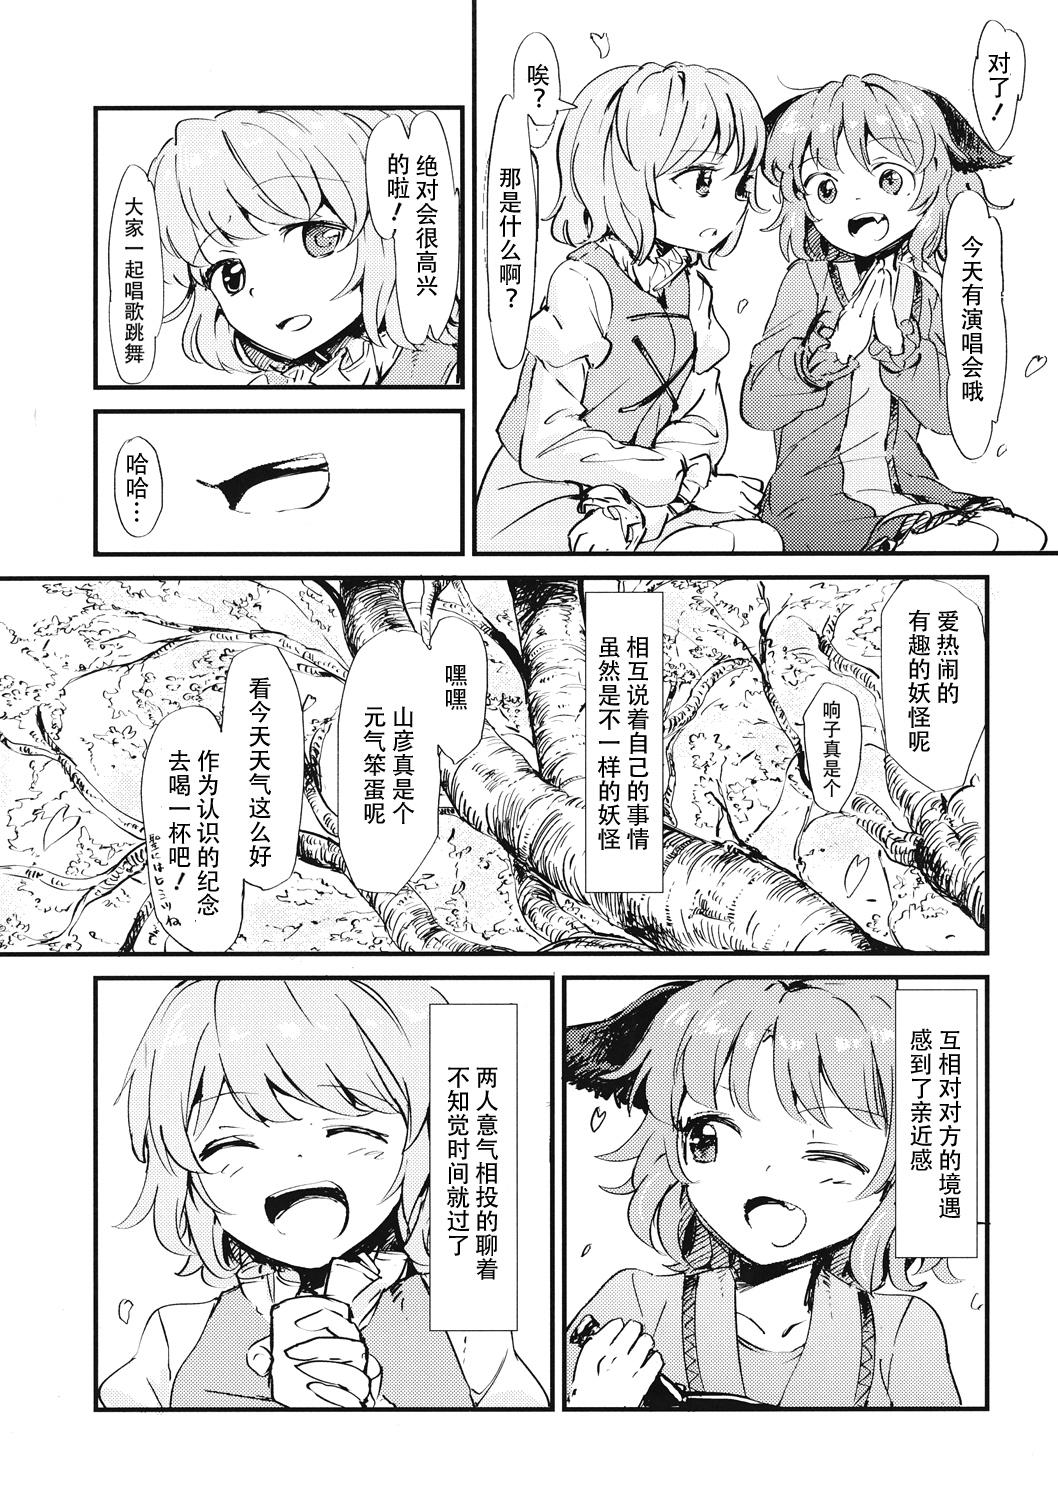 Chunky Kasa no miren - Touhou project Clothed - Page 5